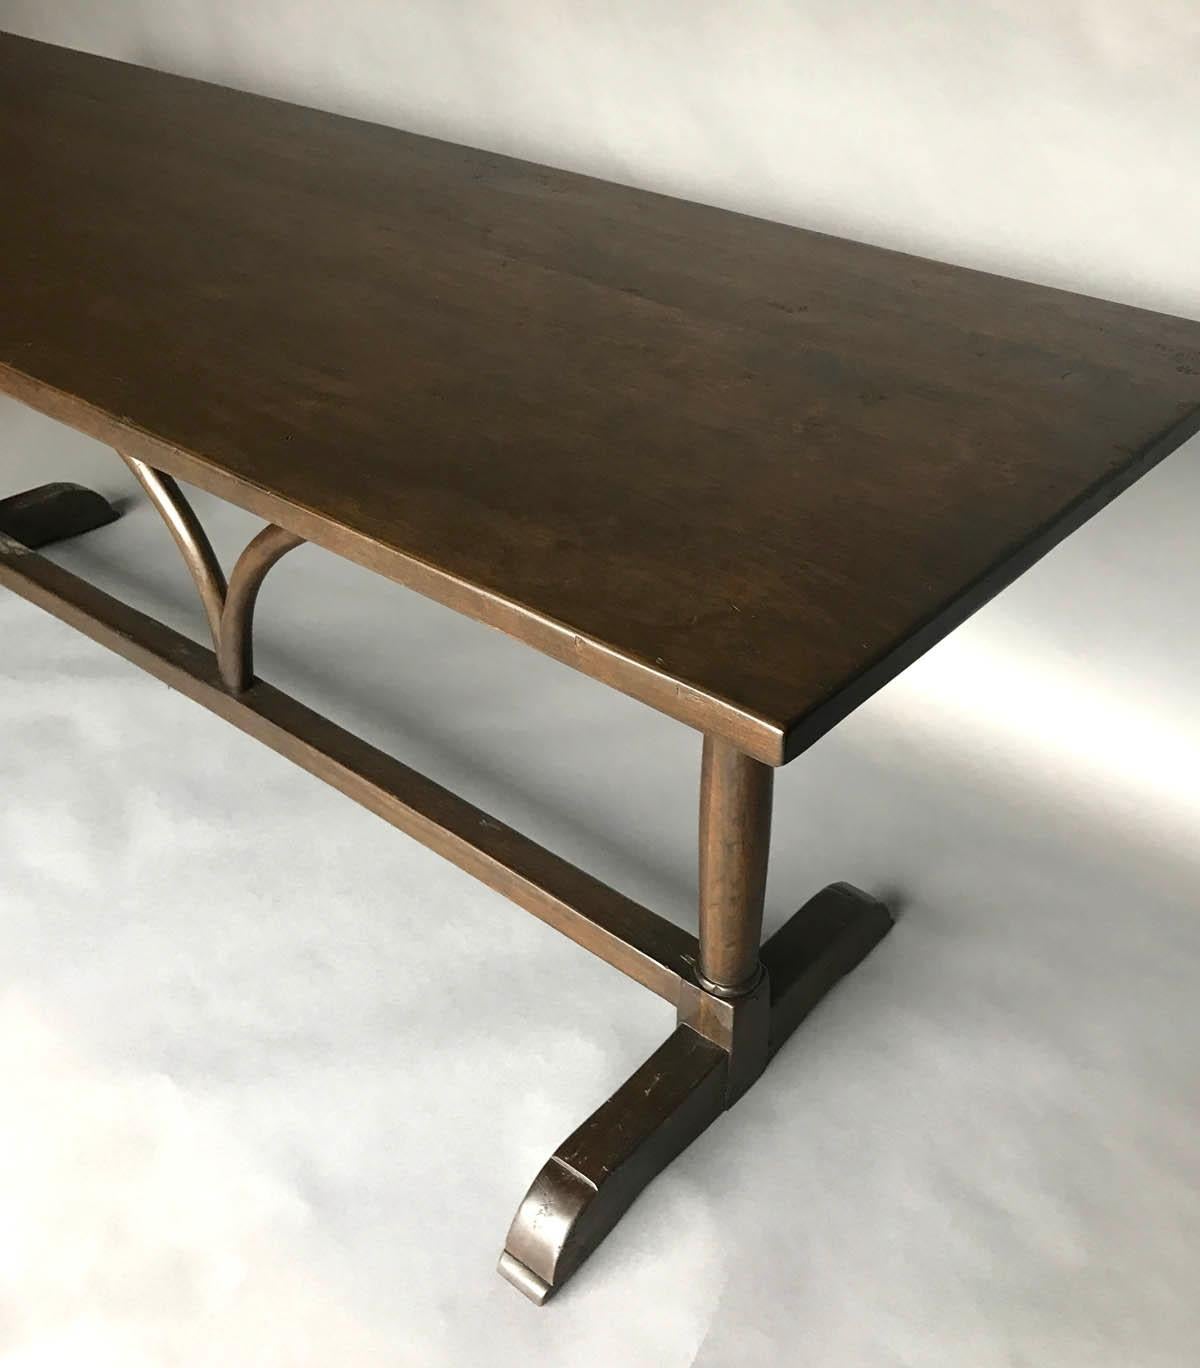 British Colonial Dos Gallos Studio Custom Walnut Desk or Dining Table with Wishbone Stretcher For Sale